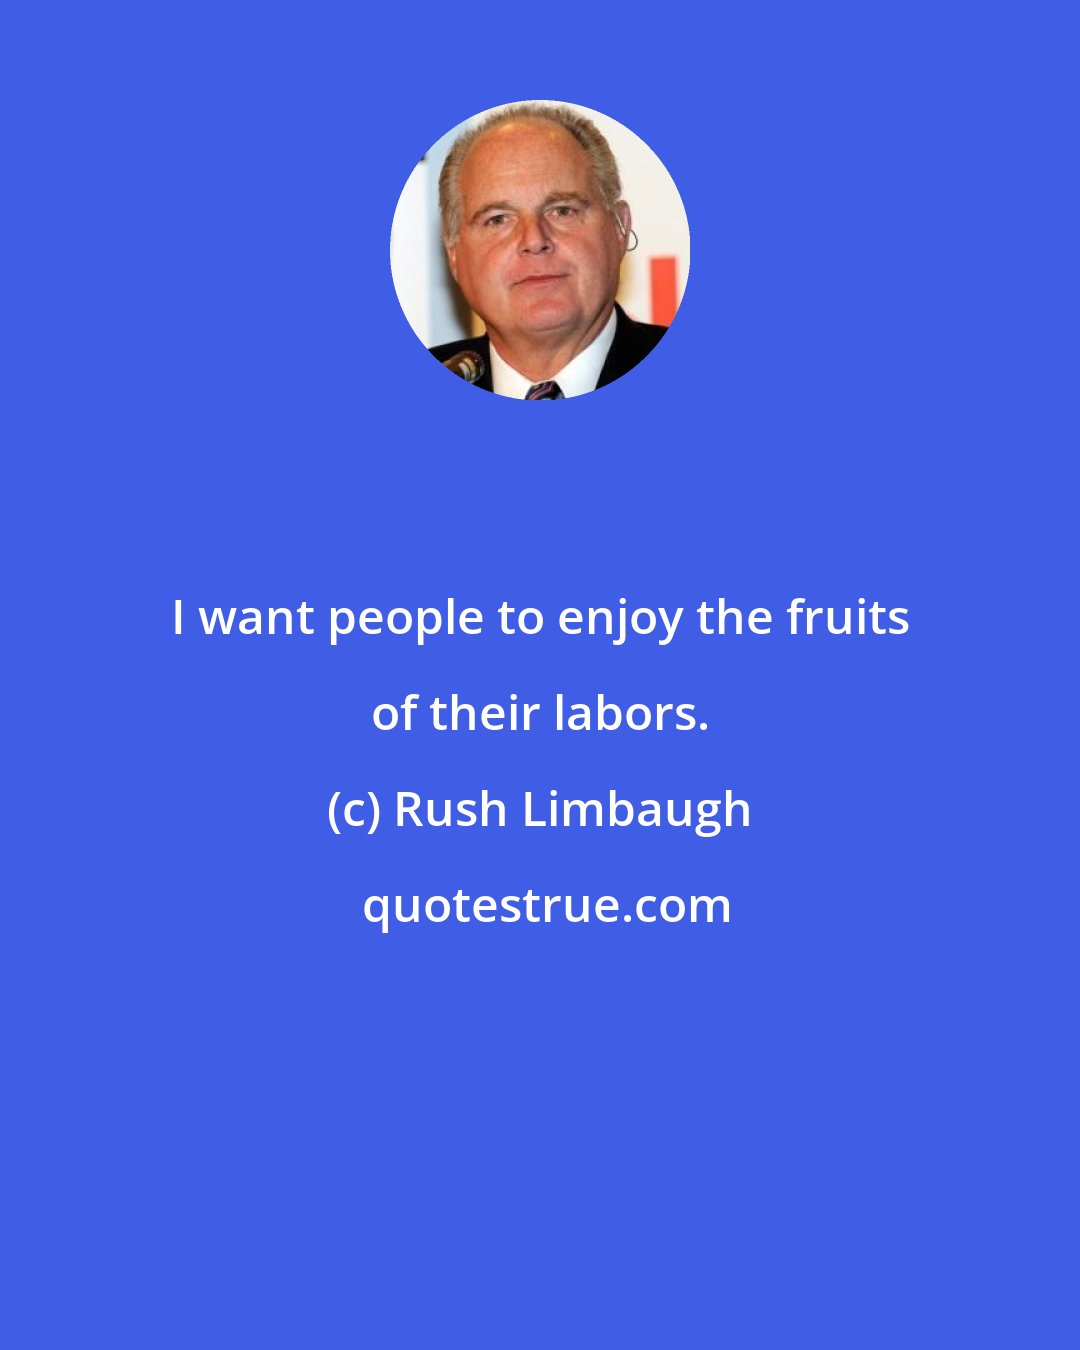 Rush Limbaugh: I want people to enjoy the fruits of their labors.